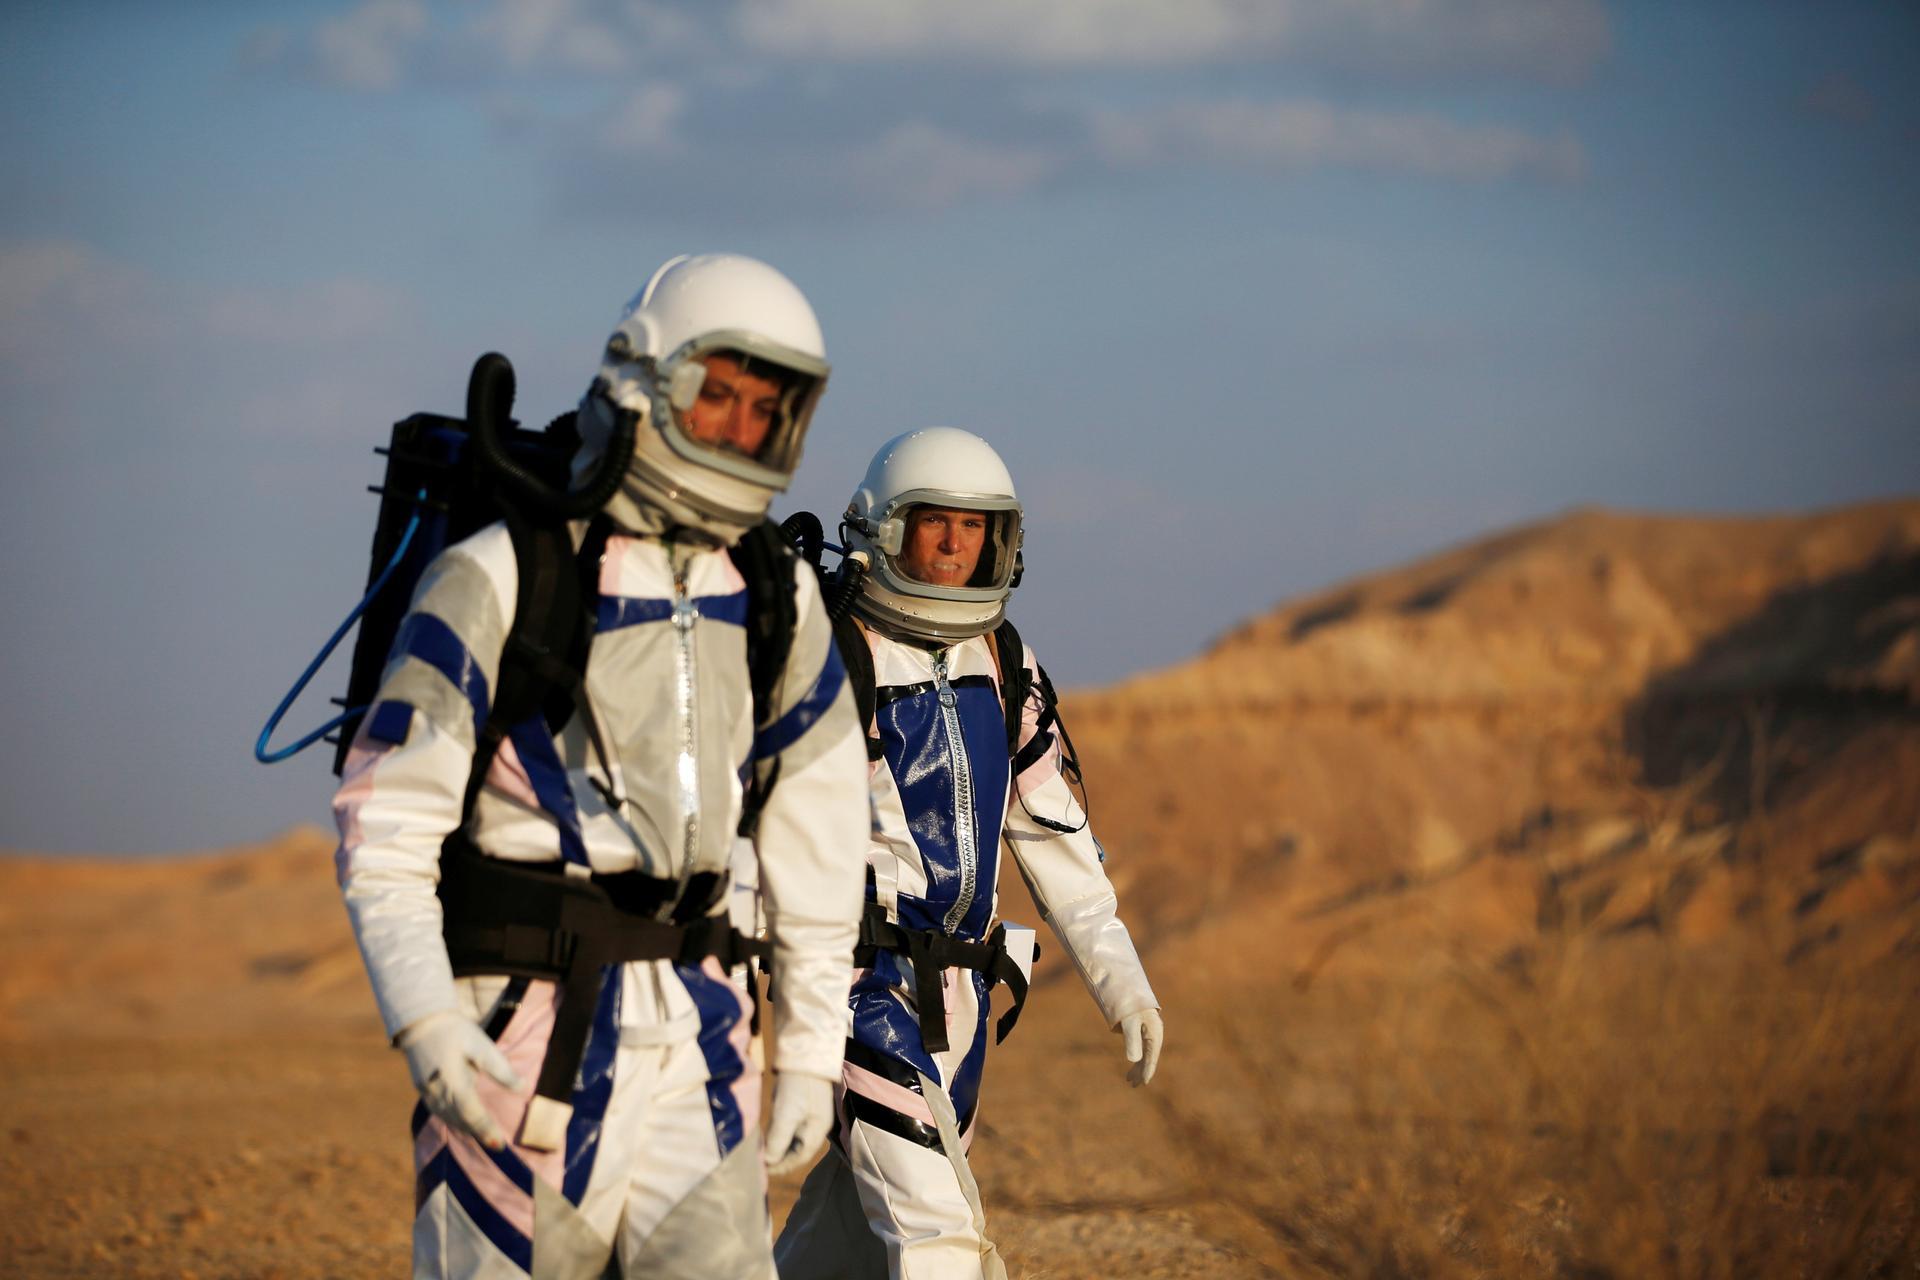 Israeli scientists participate in an experiment simulating a mission to Mars